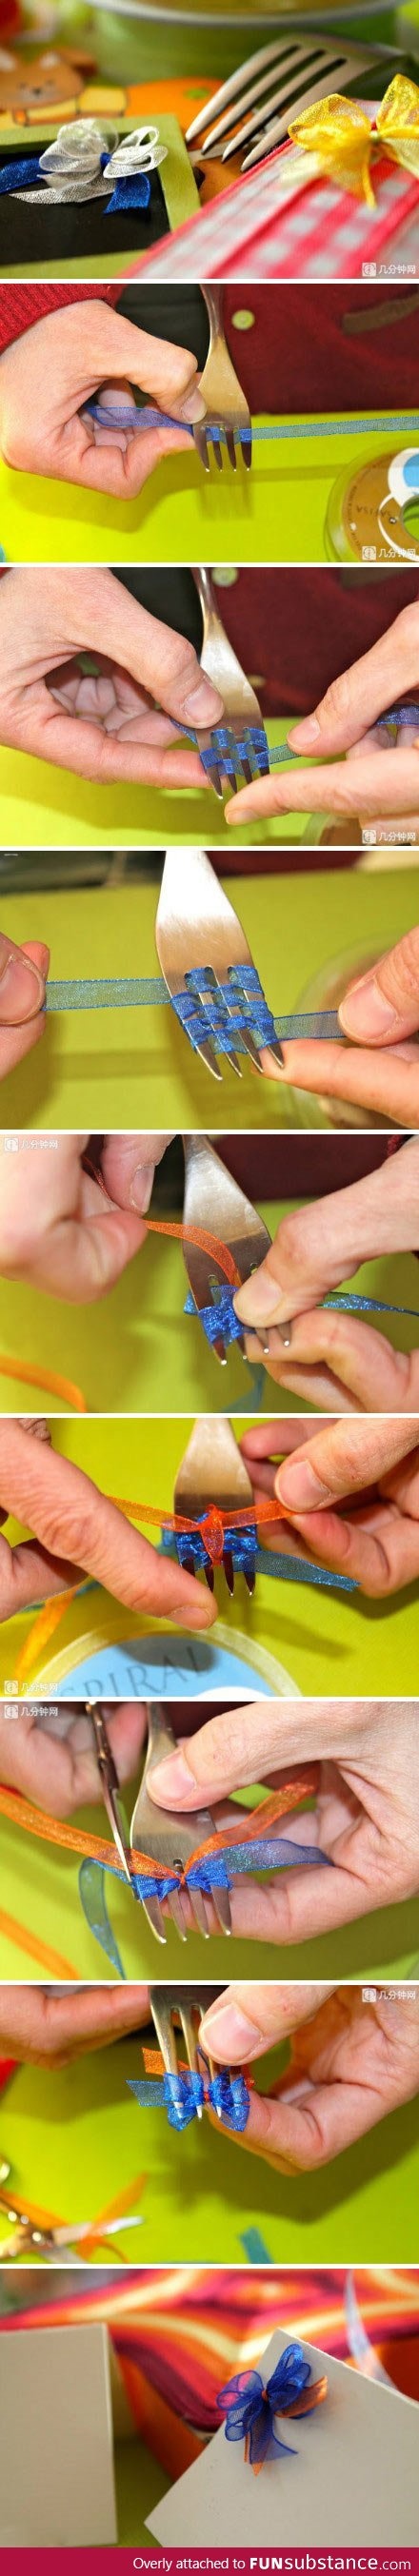 26 Iteresting DIY Ideas How To Make Bows